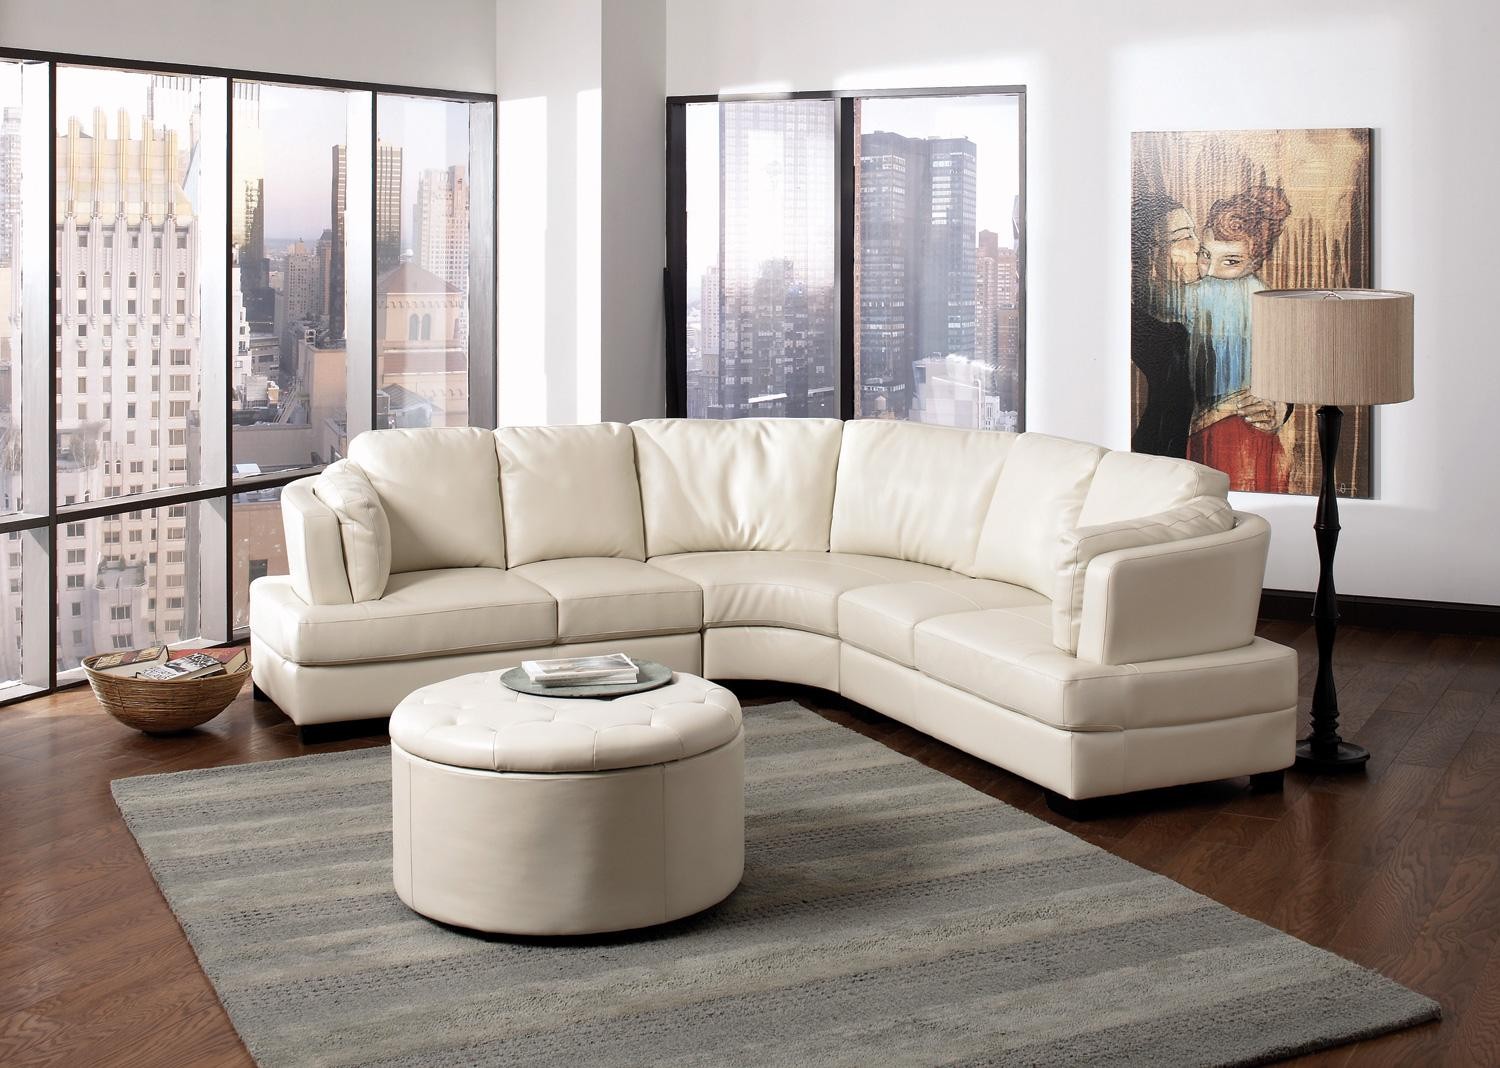 Simple Living Room Design With ELegance White Leather Sectional Sofa Furniture Set With Unique Table Wipes Simple Rug Laminated Wooden Floor Wall Paint Simple Lamp Wall And Large Window Furniture + Accessories